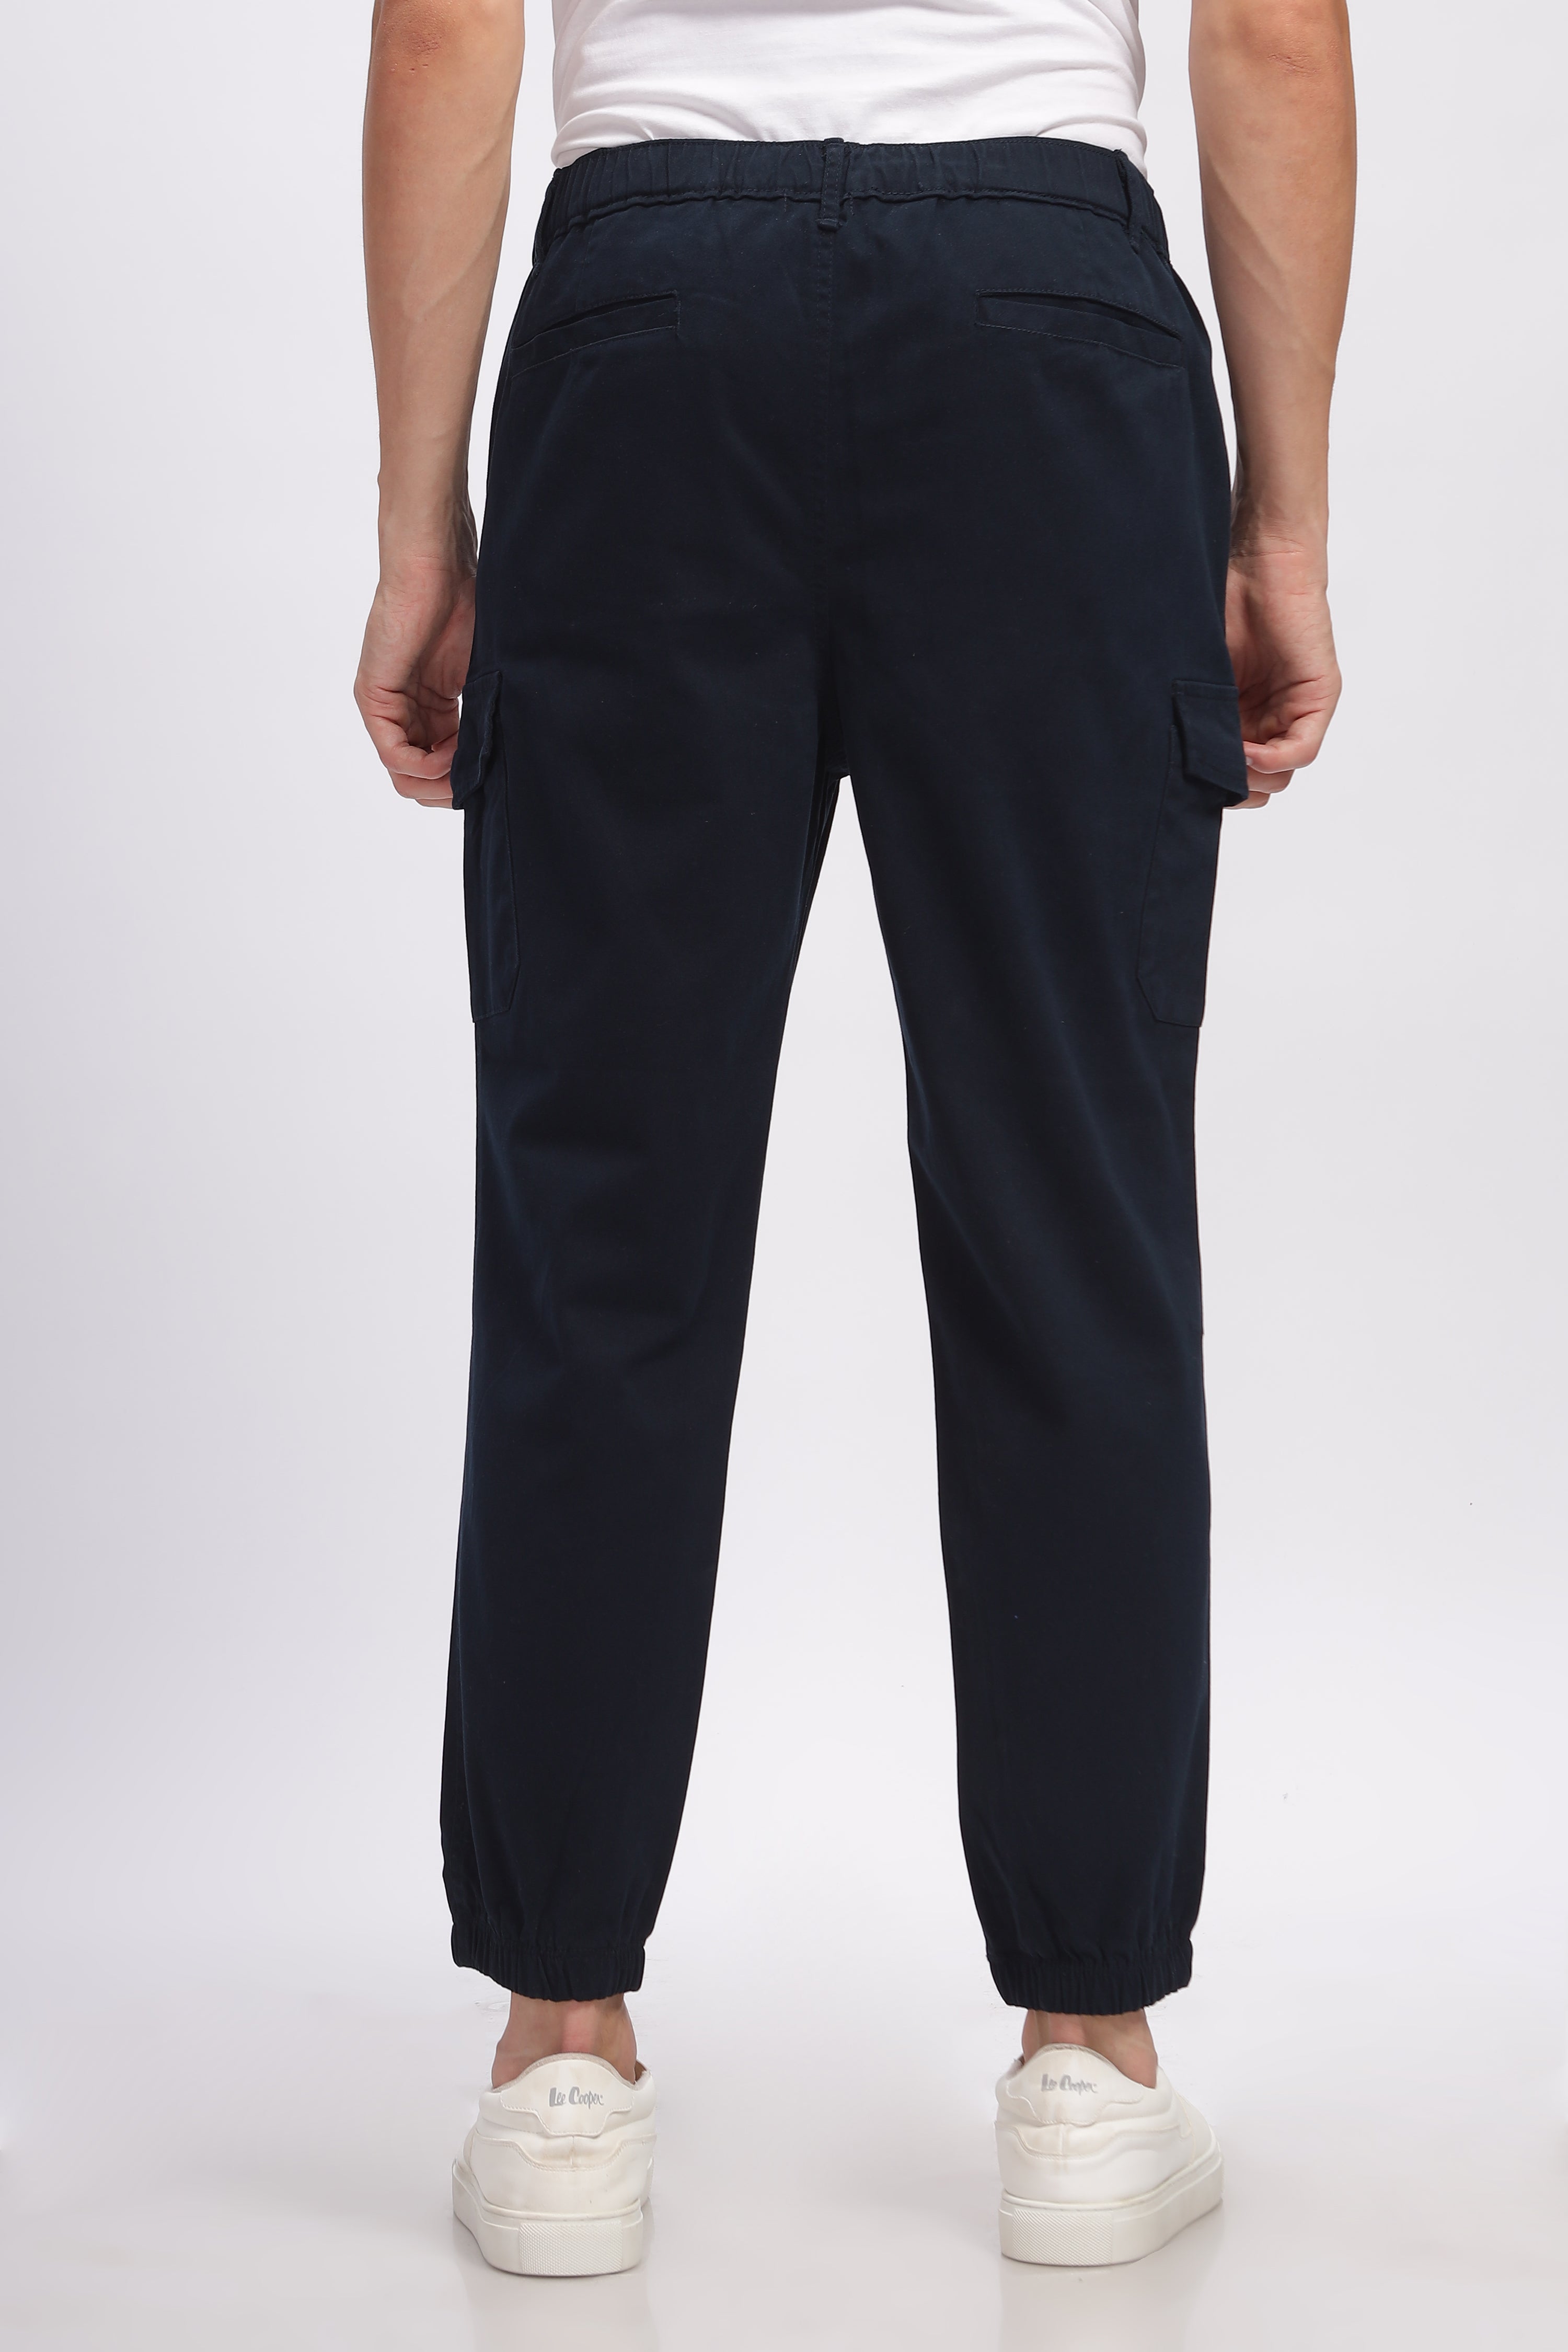 Navy Blue Cargo Style Track Pants